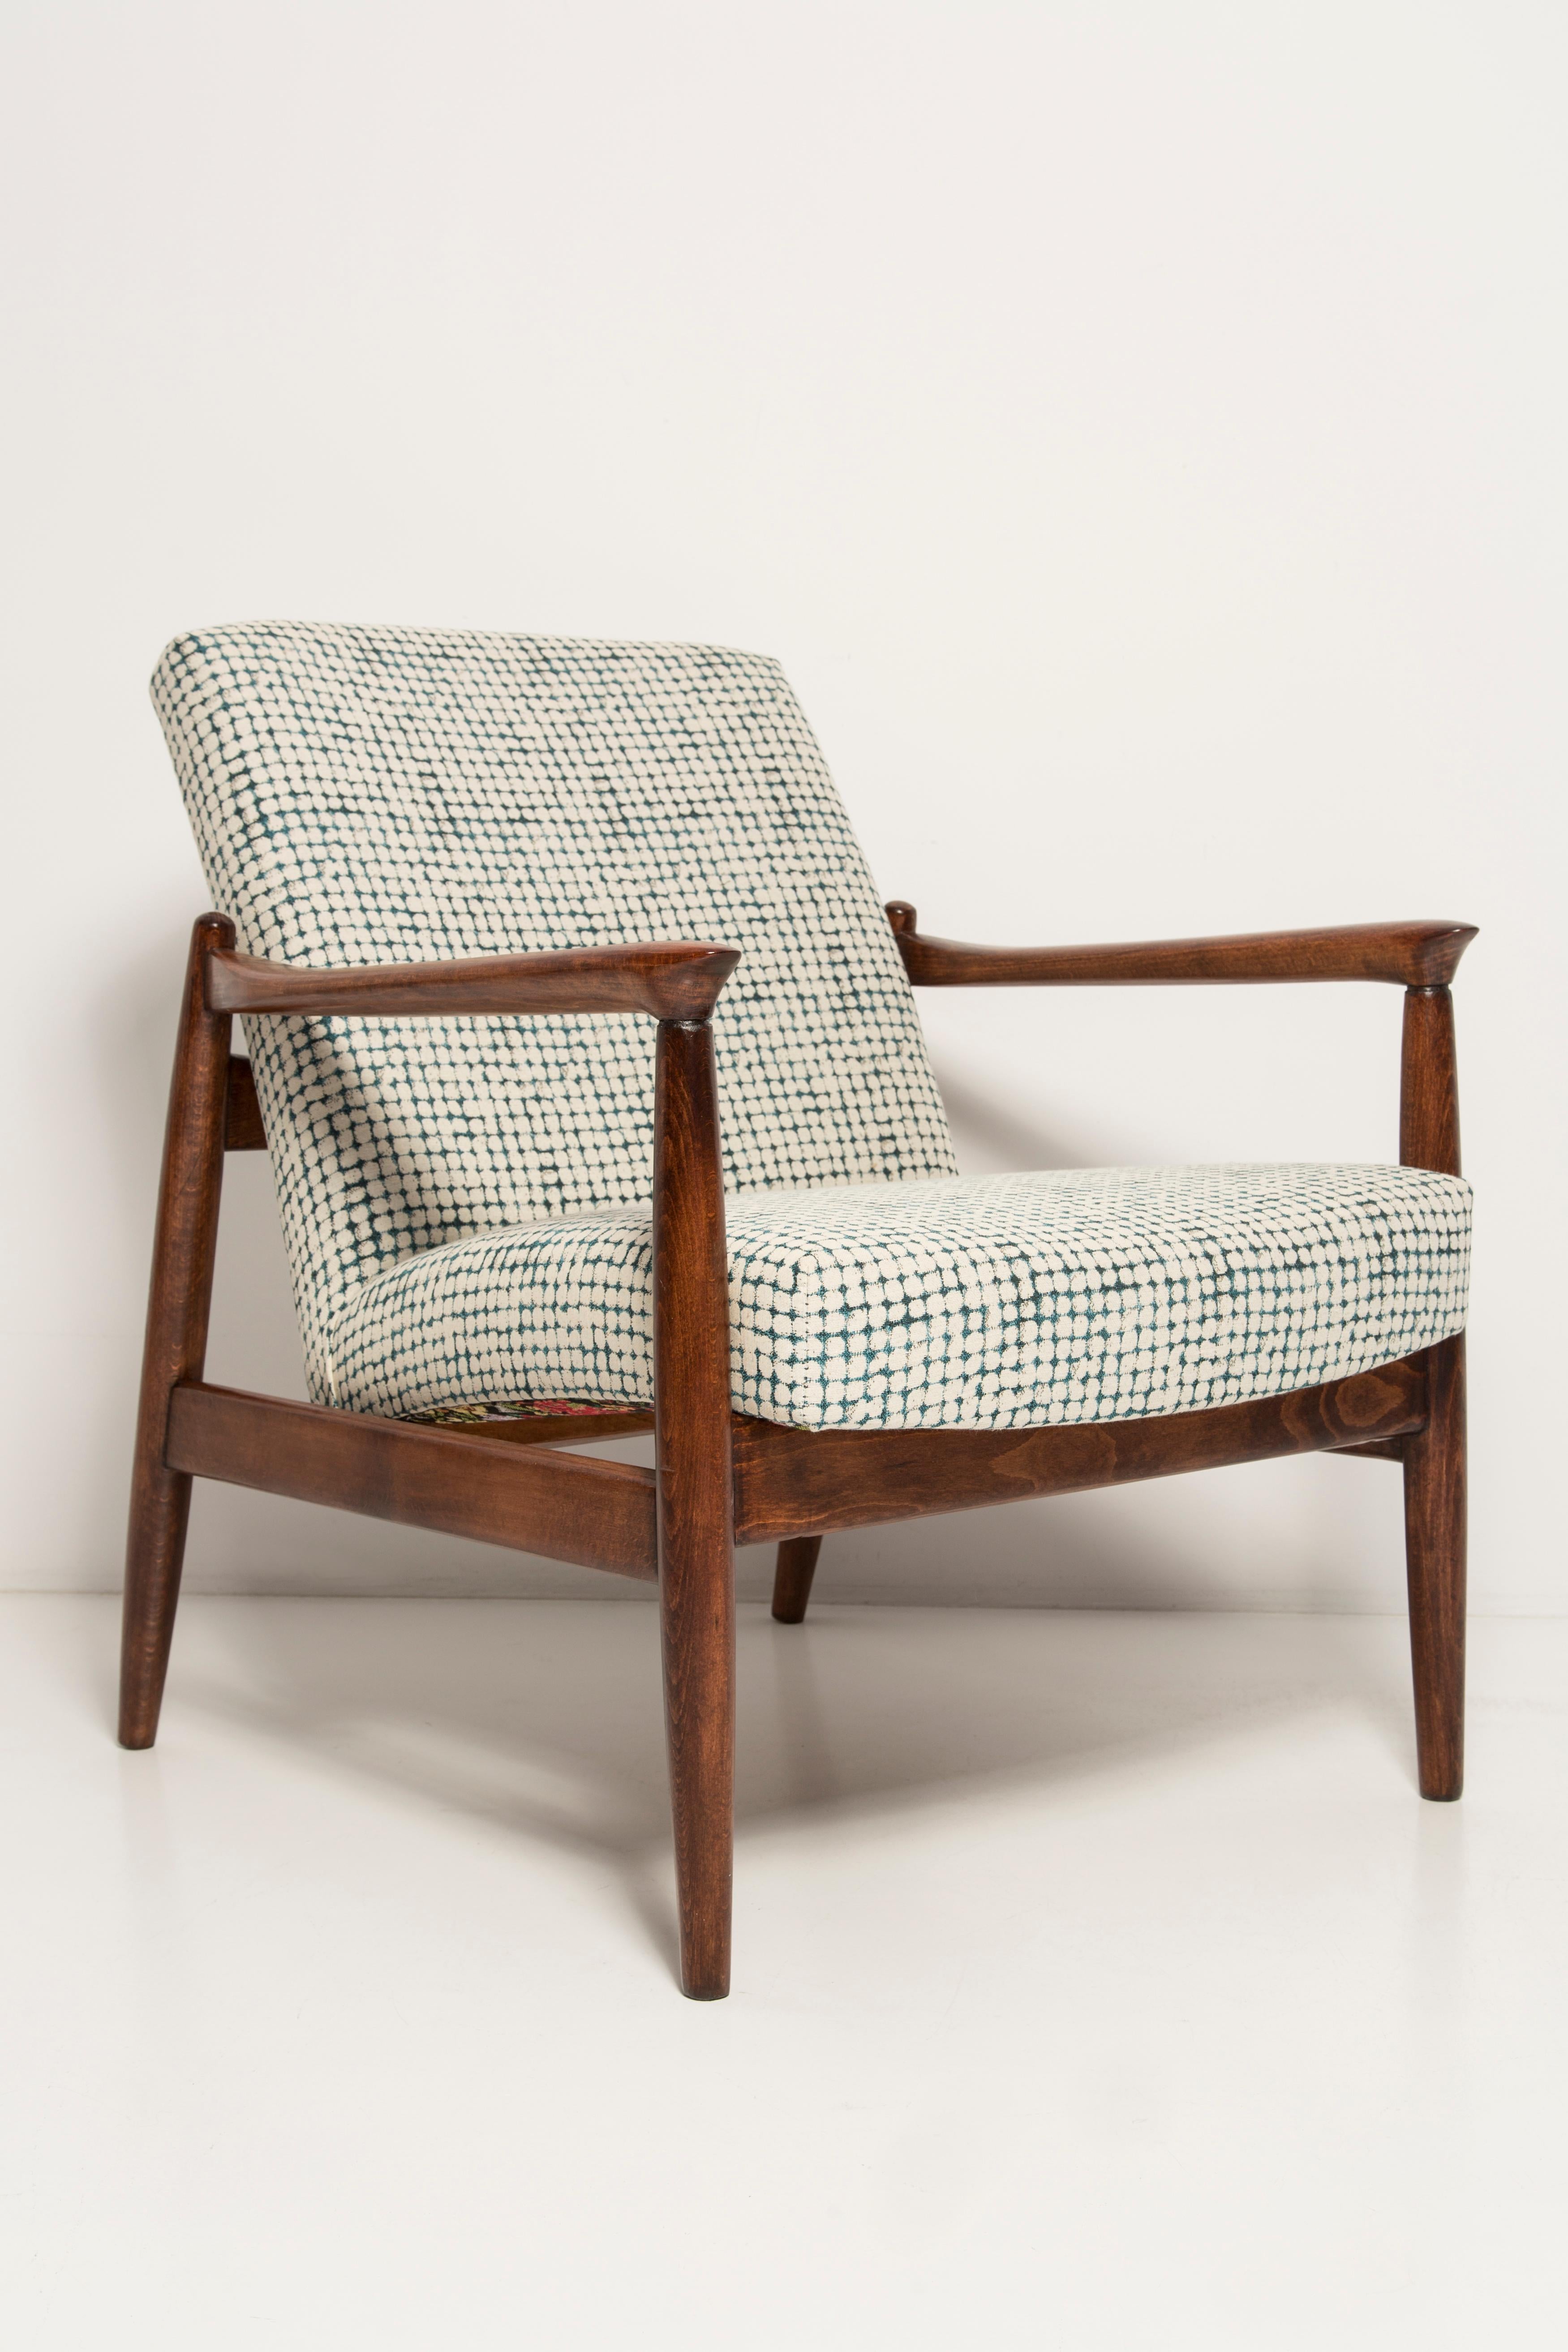 Hand-Crafted Mid Century White and Aqua Vintage Armchair and Stool, Edmund Homa, Europe, 1960s For Sale